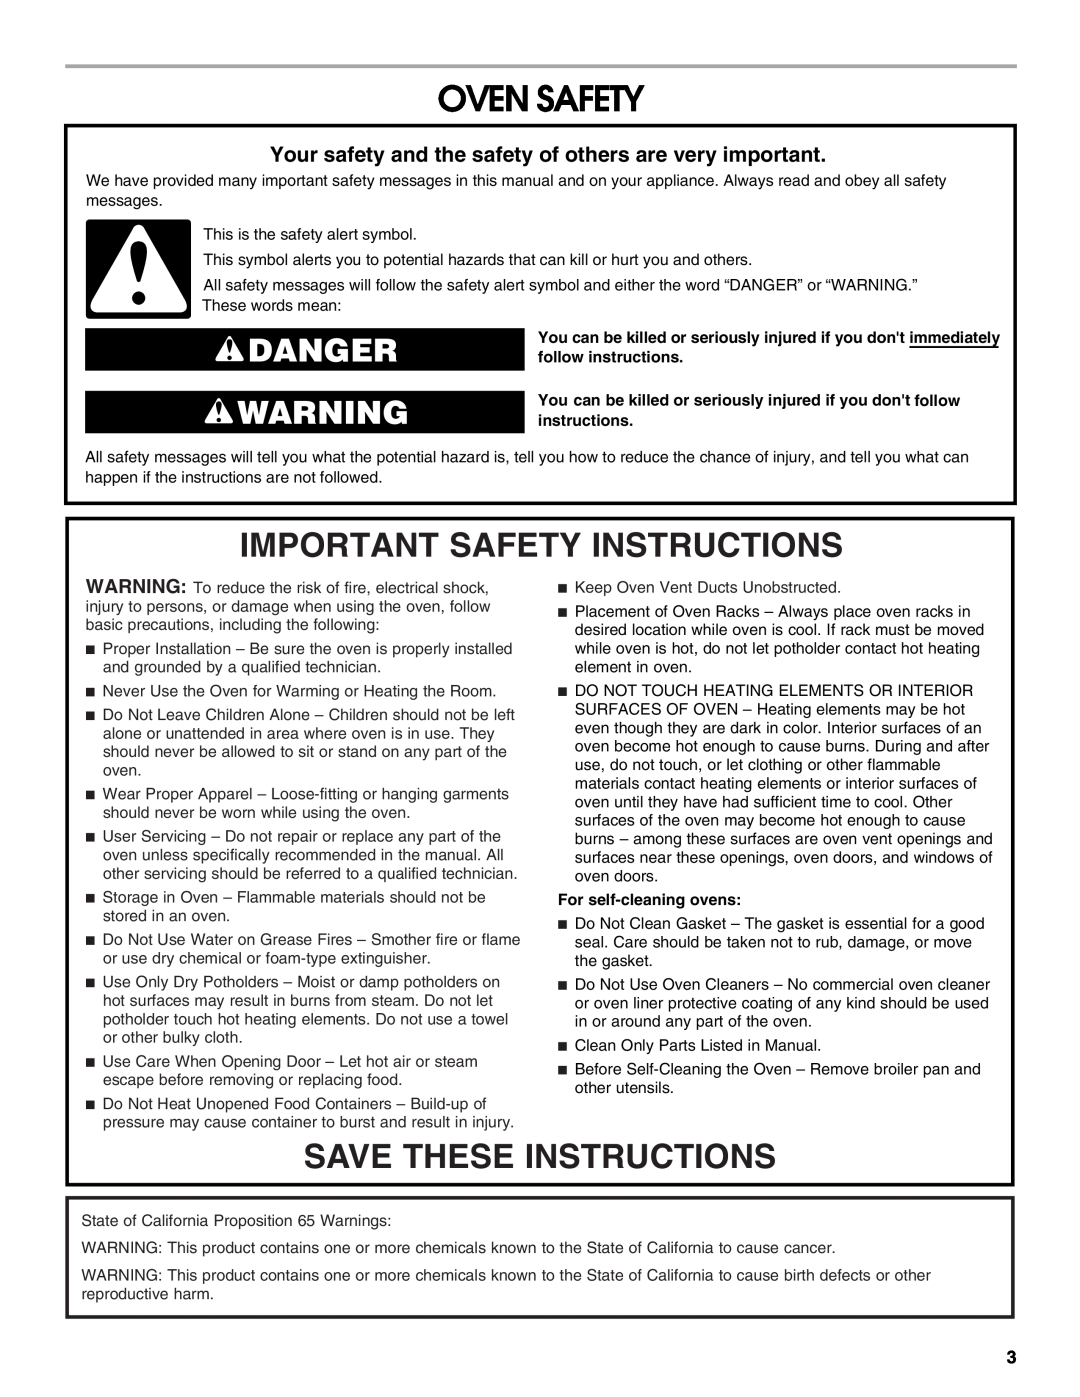 Jenn-Air JJW3830 manual Oven Safety, Important Safety Instructions, Save These Instructions, Danger 